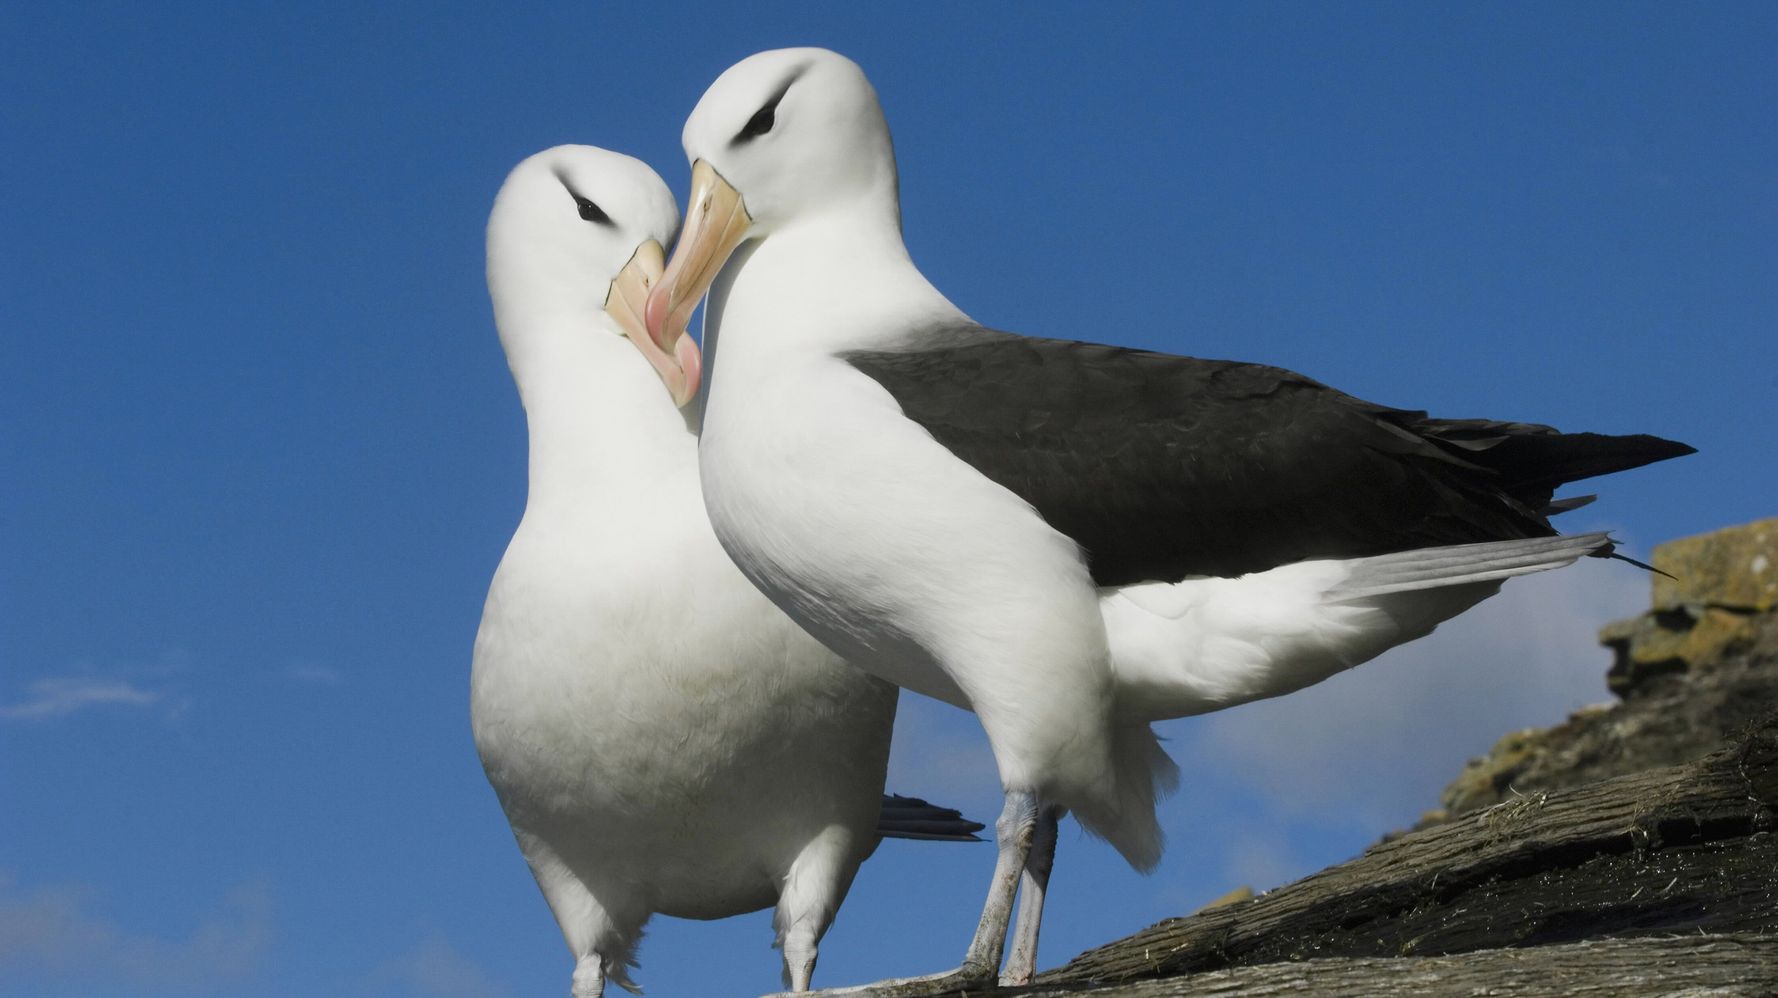 Albatross ‘Divorces’ May Be Climbing Because Of Climate Change